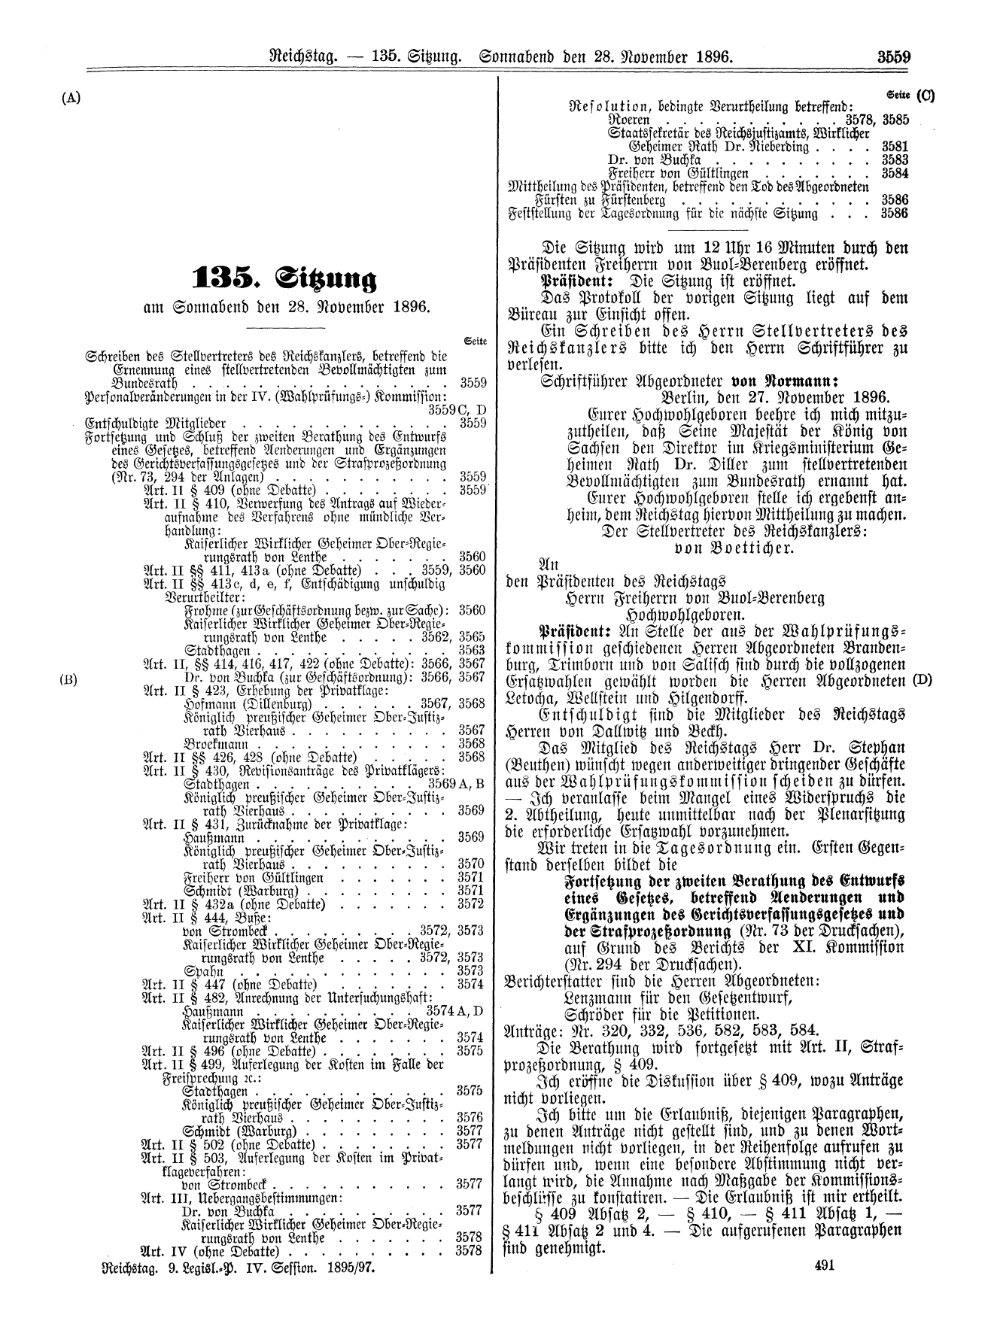 Scan of page 3559